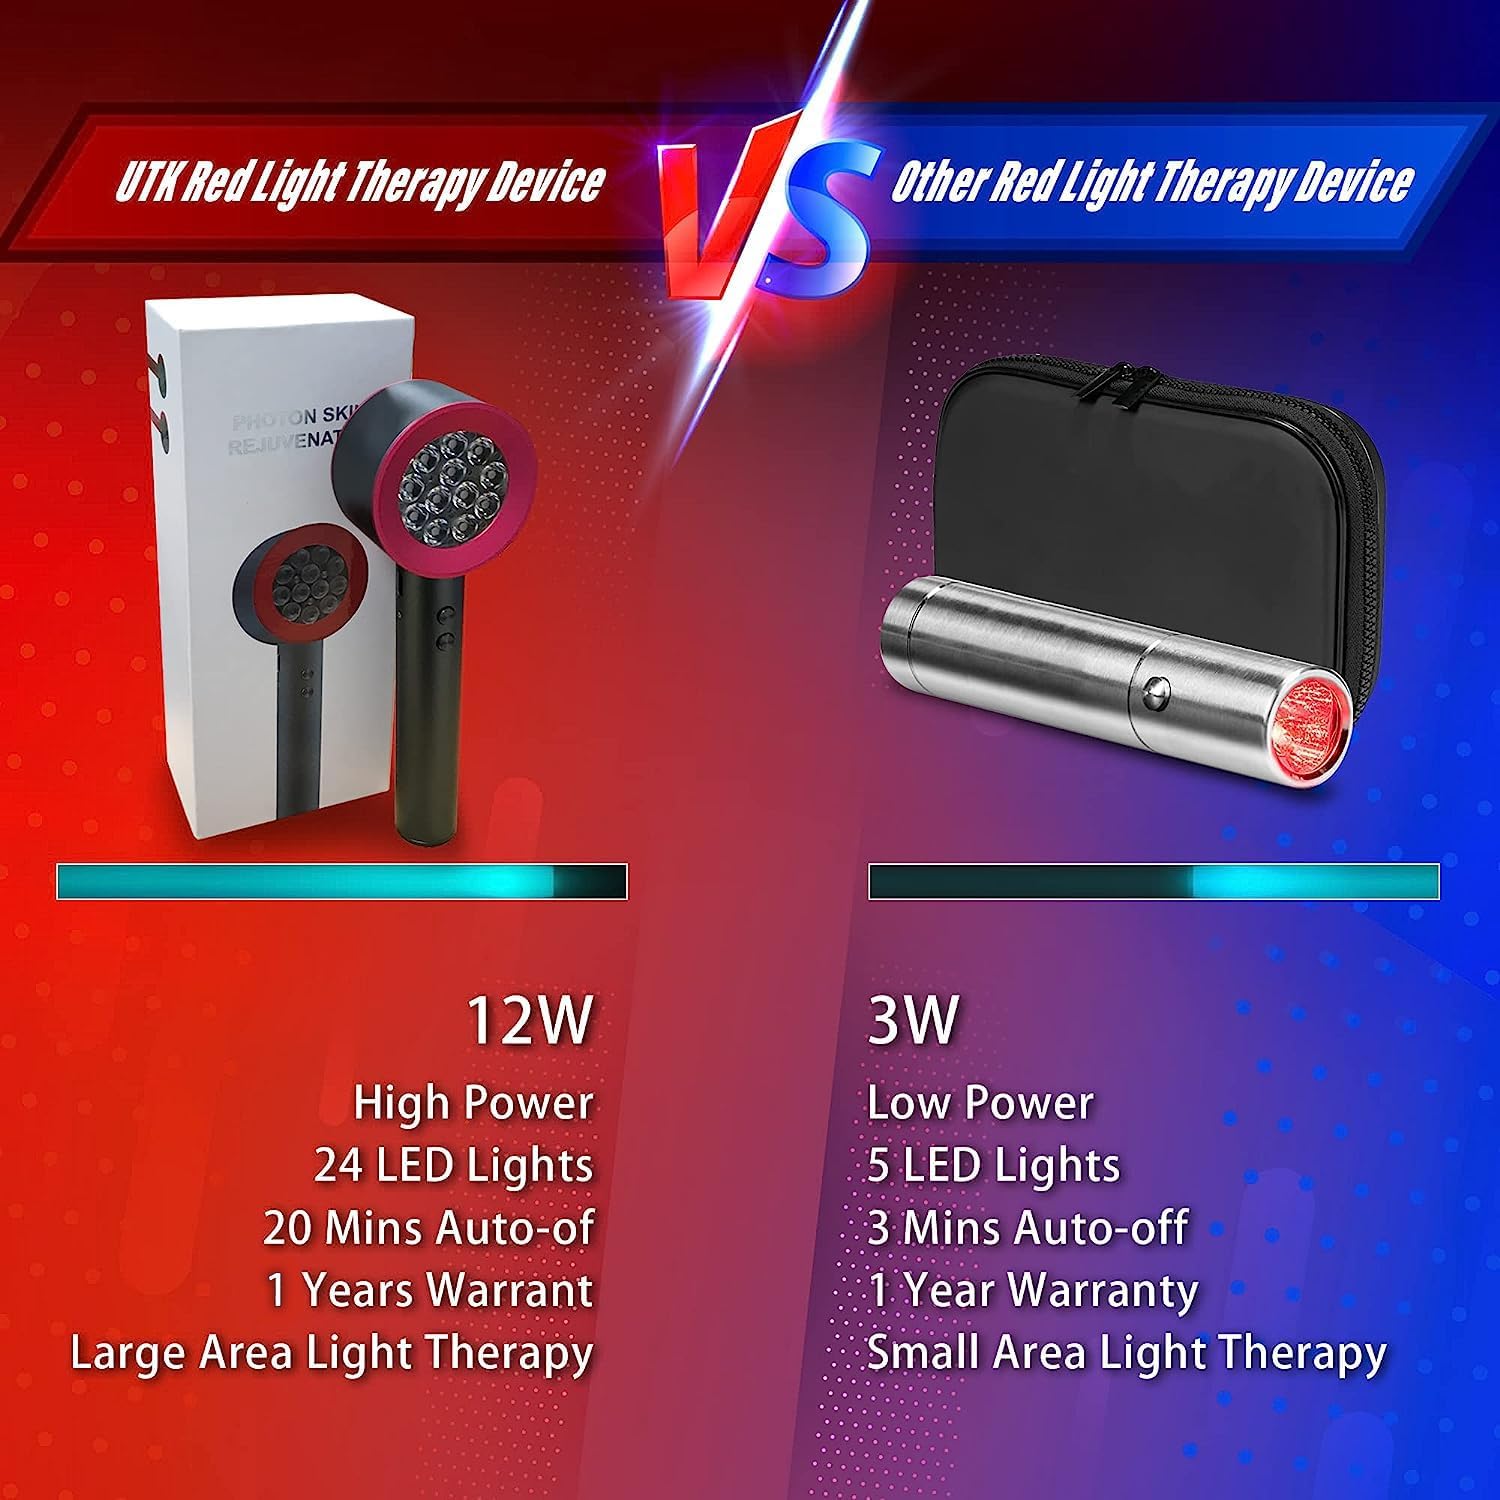 UTK Upgrade High Power 24 LED Red Light Therapy Device - Purely Relaxation